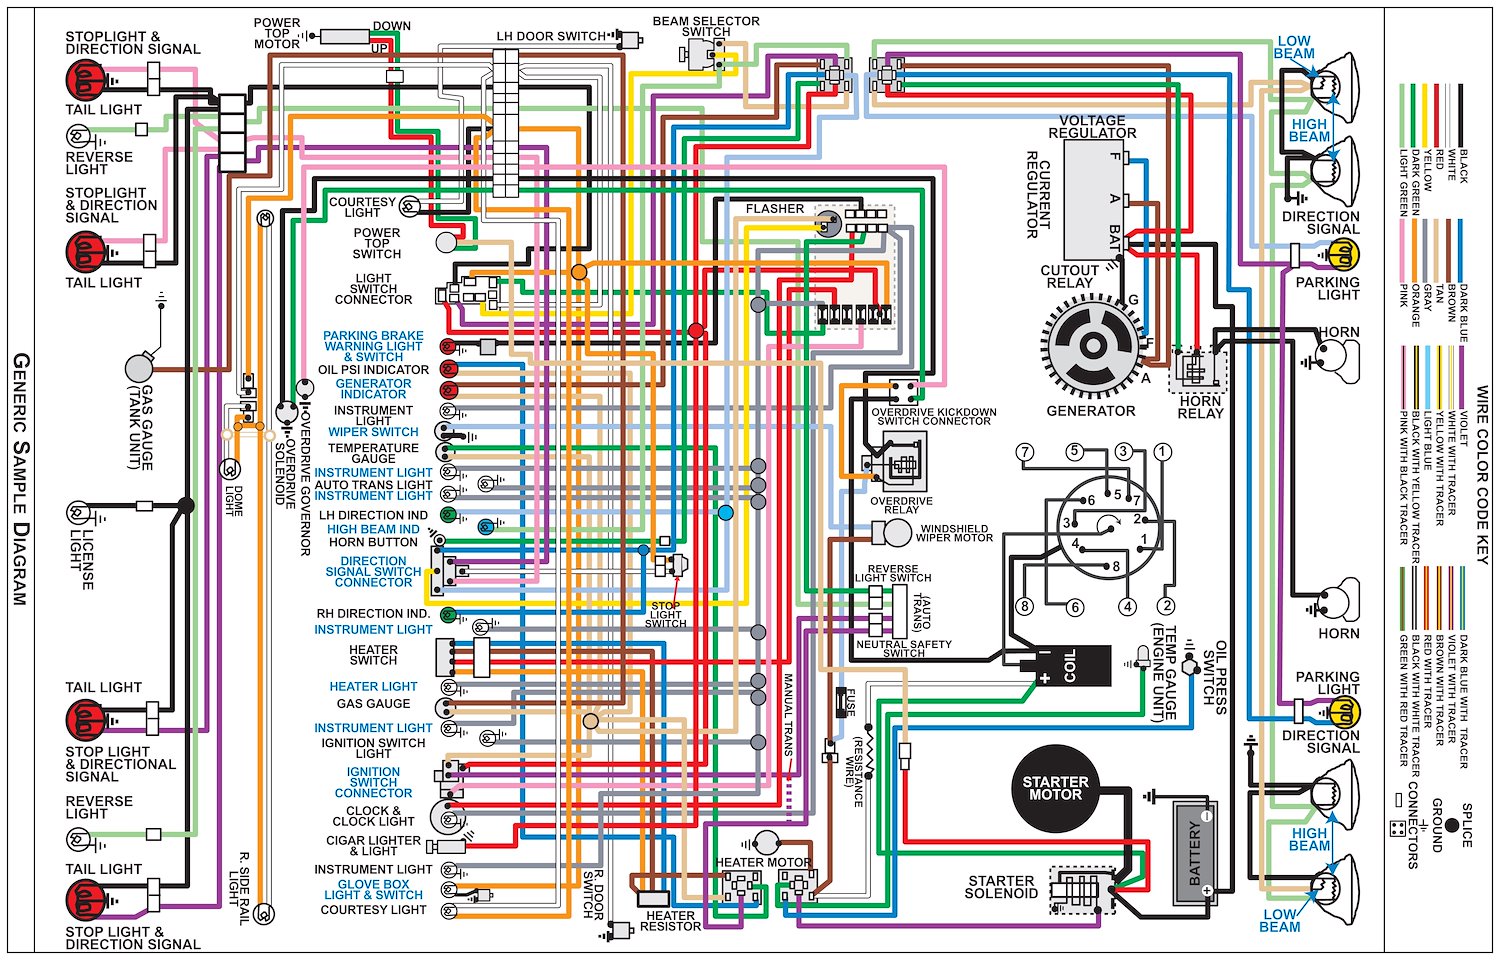 Wiring Diagram for 1974 Ford Mustang II, 11 in x 17 in., Laminated